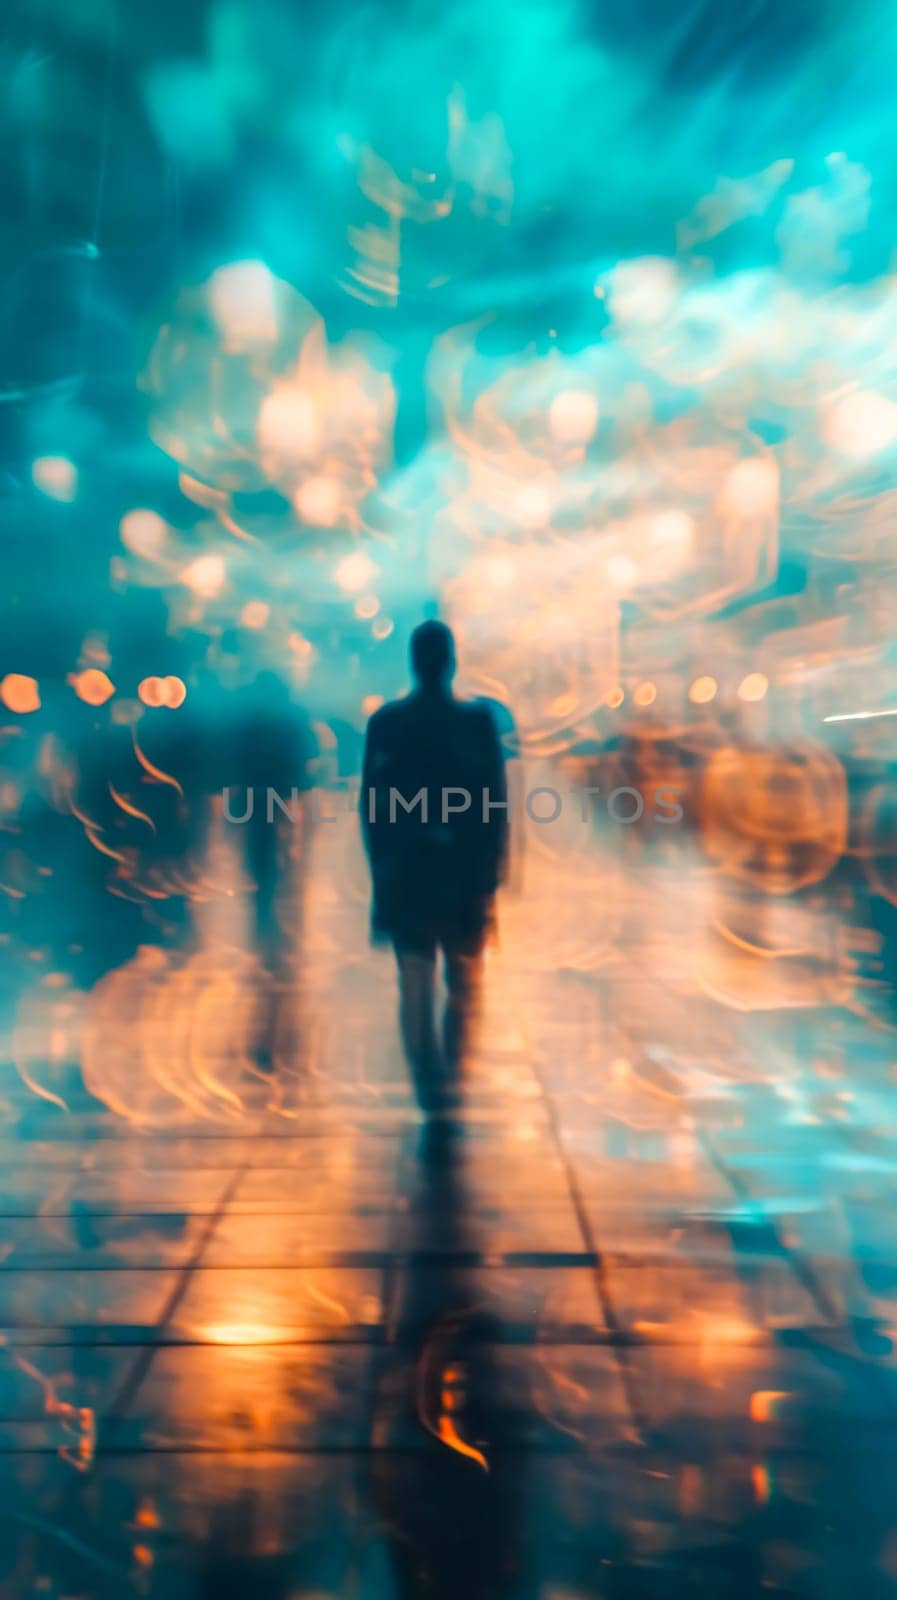 dreamlike vision of silhouetted figures walking through a blur of golden and turquoise light, creating an effect of movement and a sense of mystery or contemplation by Edophoto